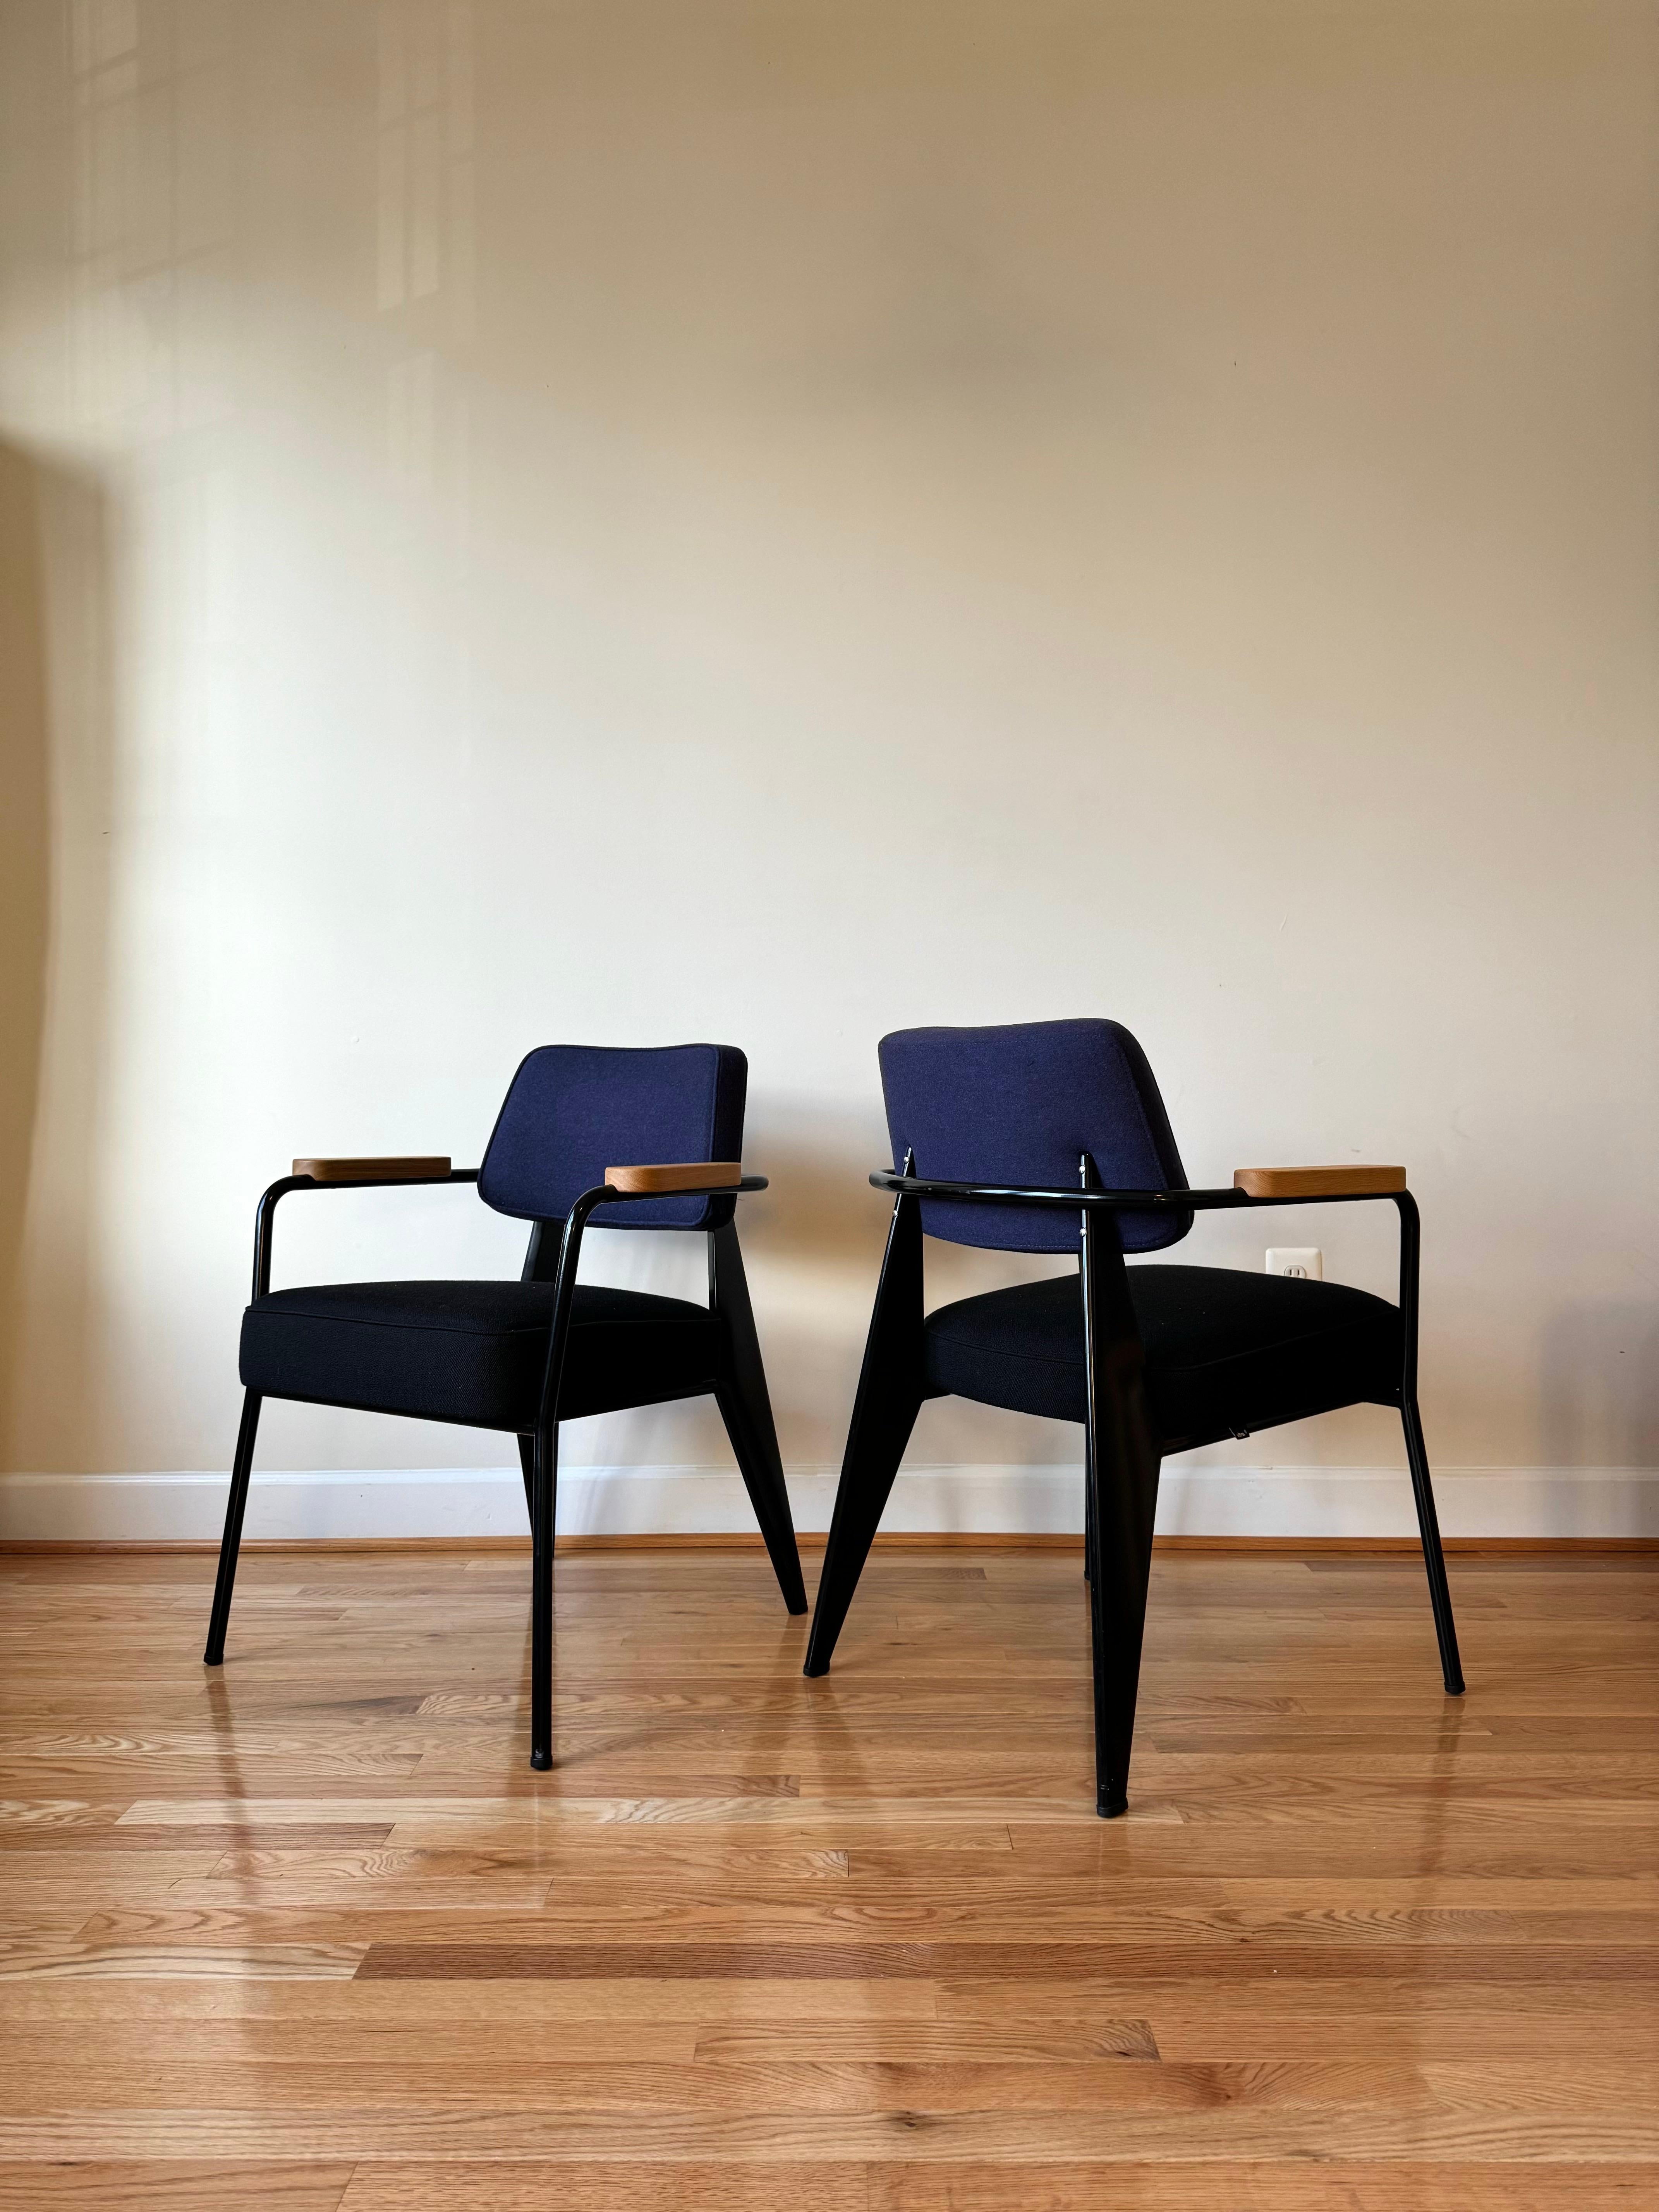 The chair was intended for offices, but also for classrooms, which earned it the sobriquet of “teacher’s chair”.

Fauteuil Direction is especially suited for dining room seating or as an armchair in home offices. The design reflects Jean Prouvé's